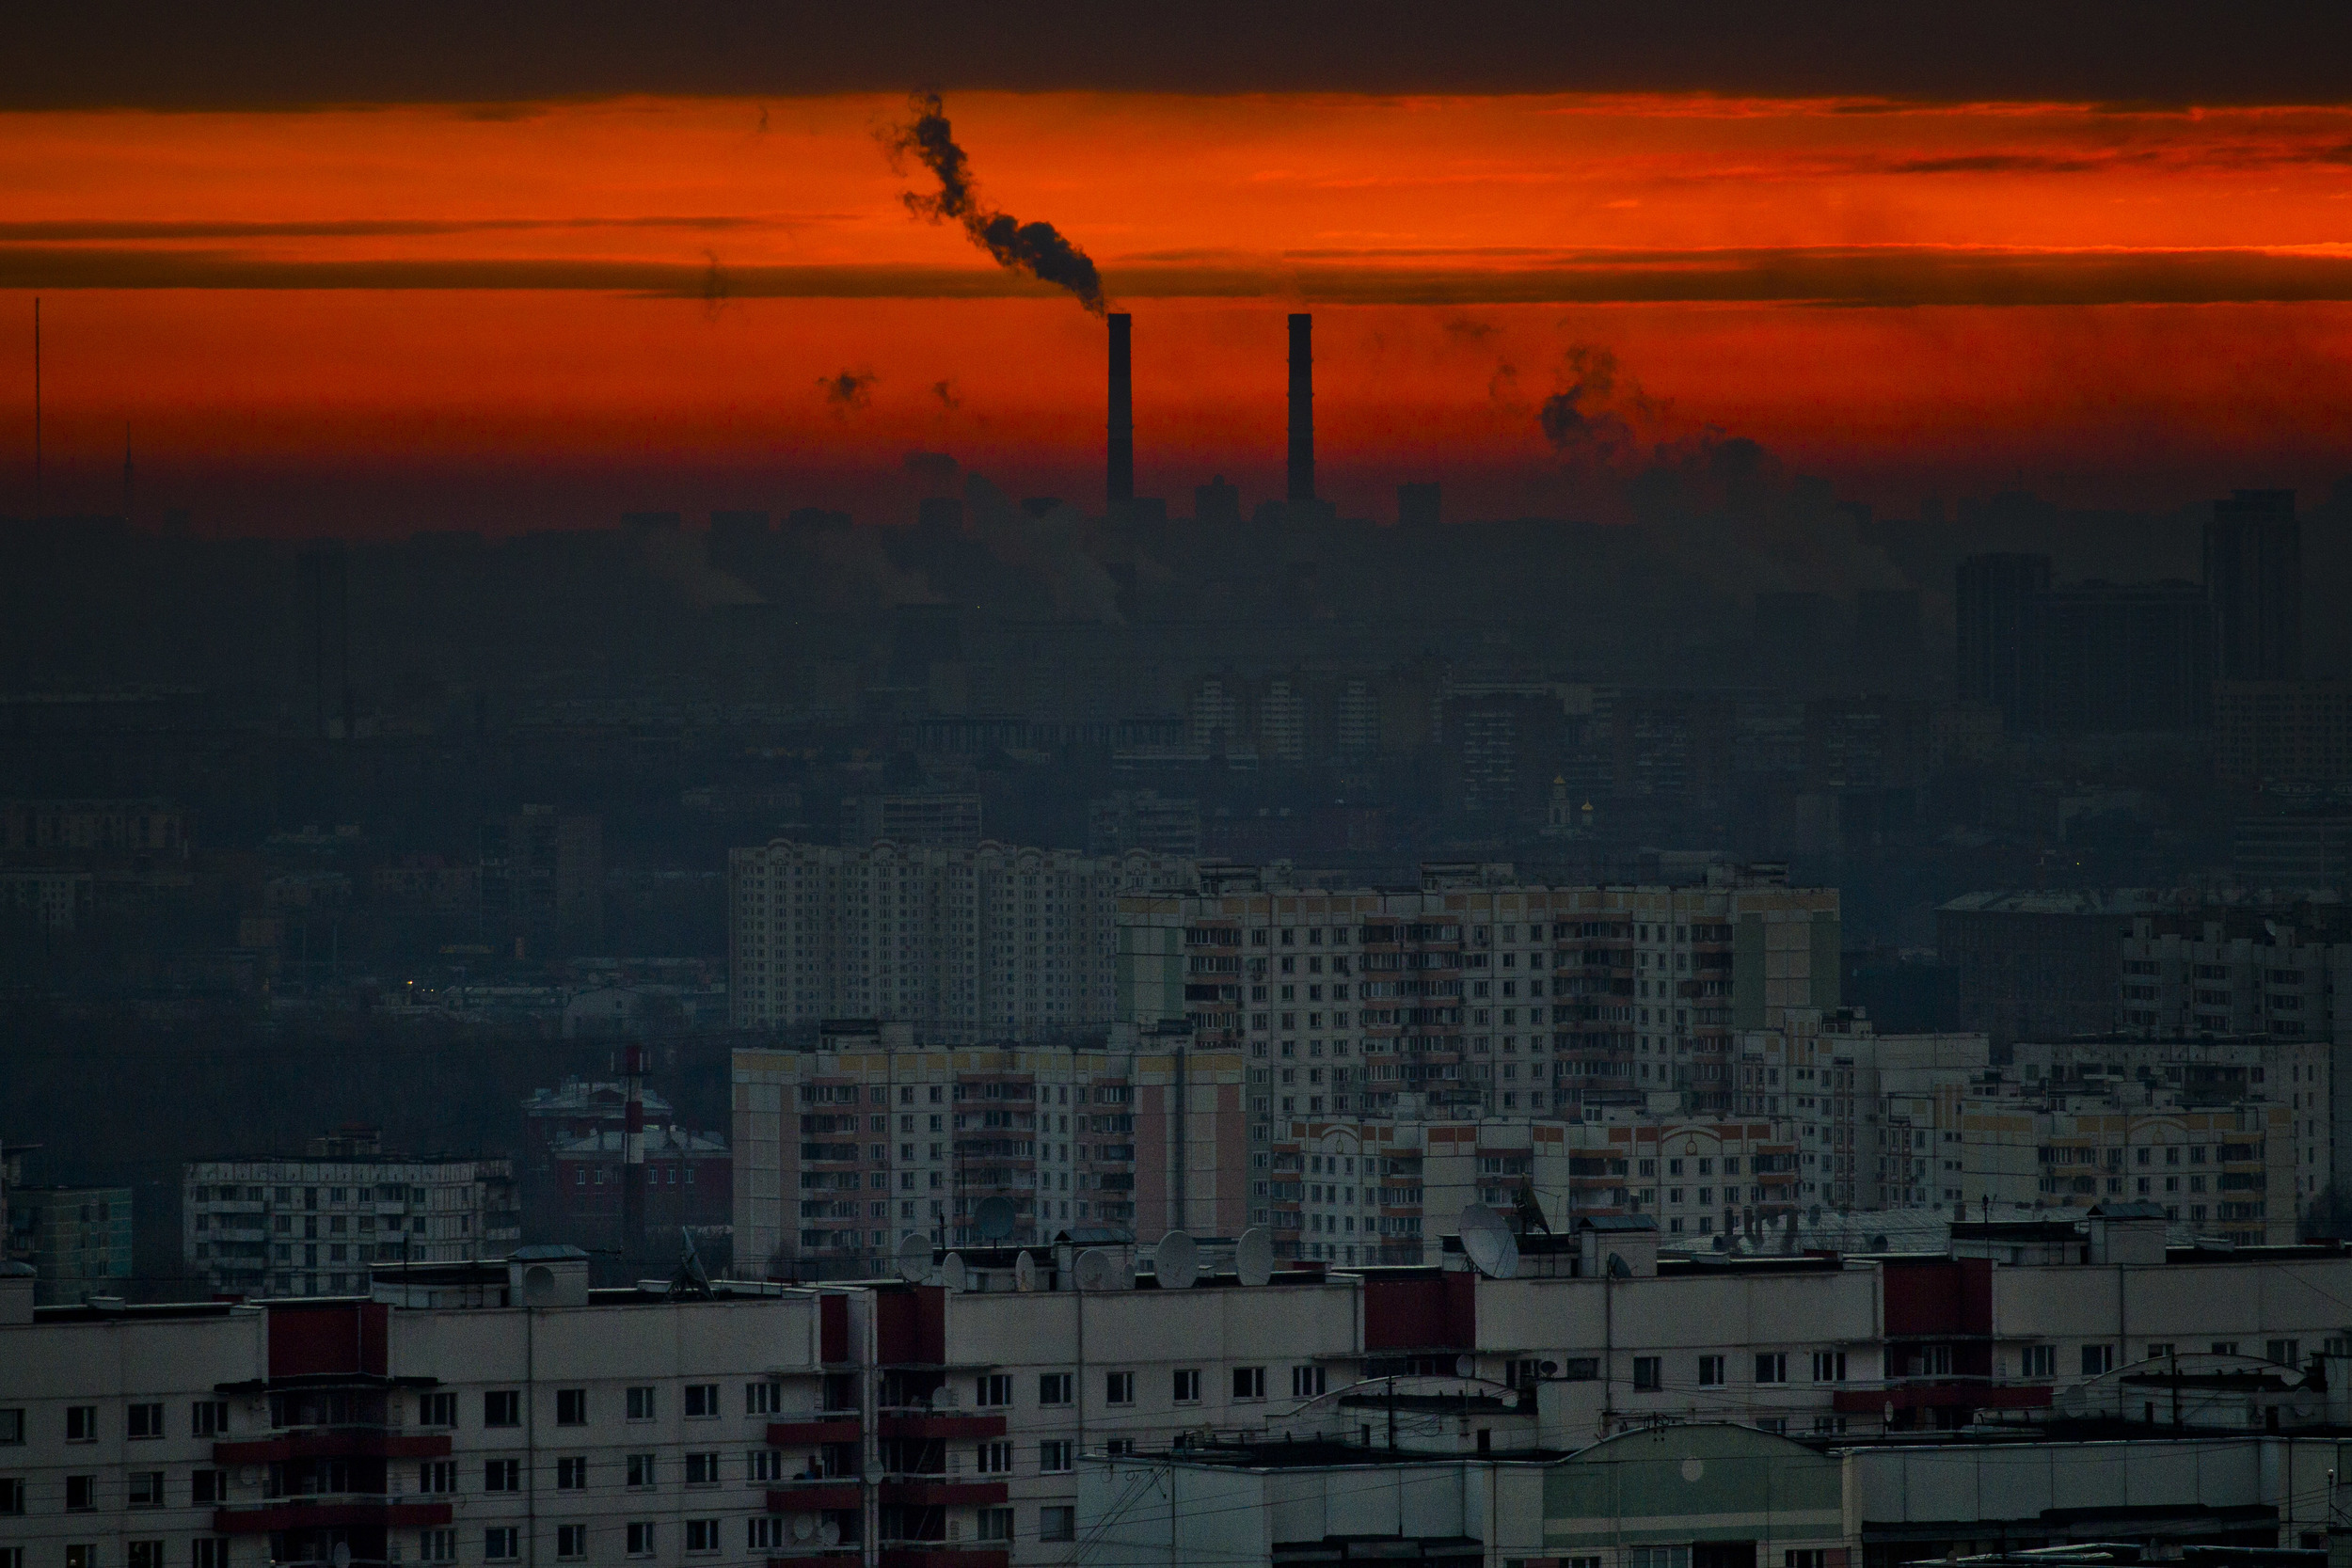 A sunrise in Moscow. November 15, 2012